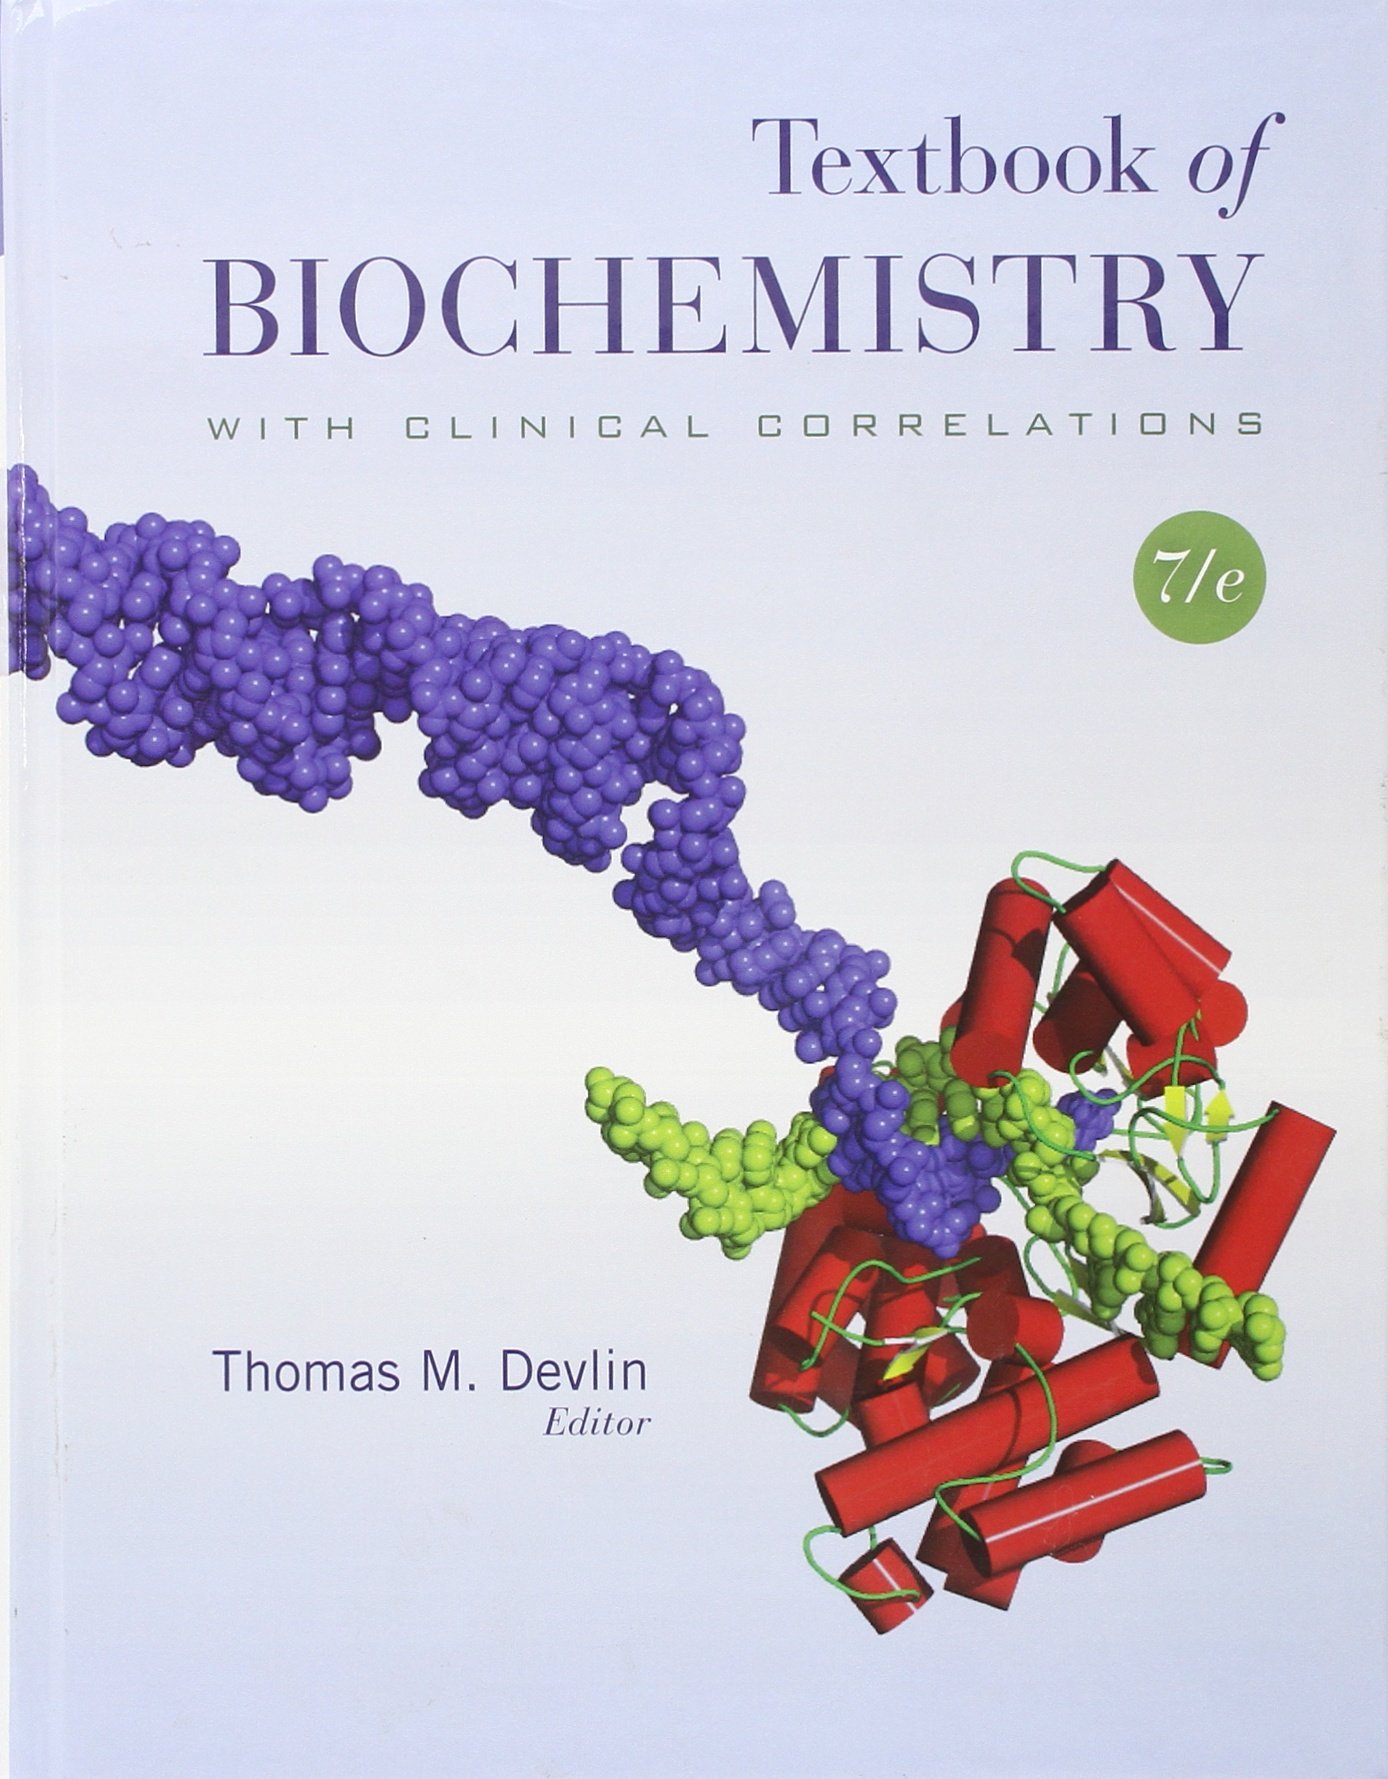 TEXTBOOK OF BIOCHEMISTRY WITH CLINICAL CORRELATIONS, 7TH EDITION  (ENGLISH, HARDCOVER, DEVLIN)